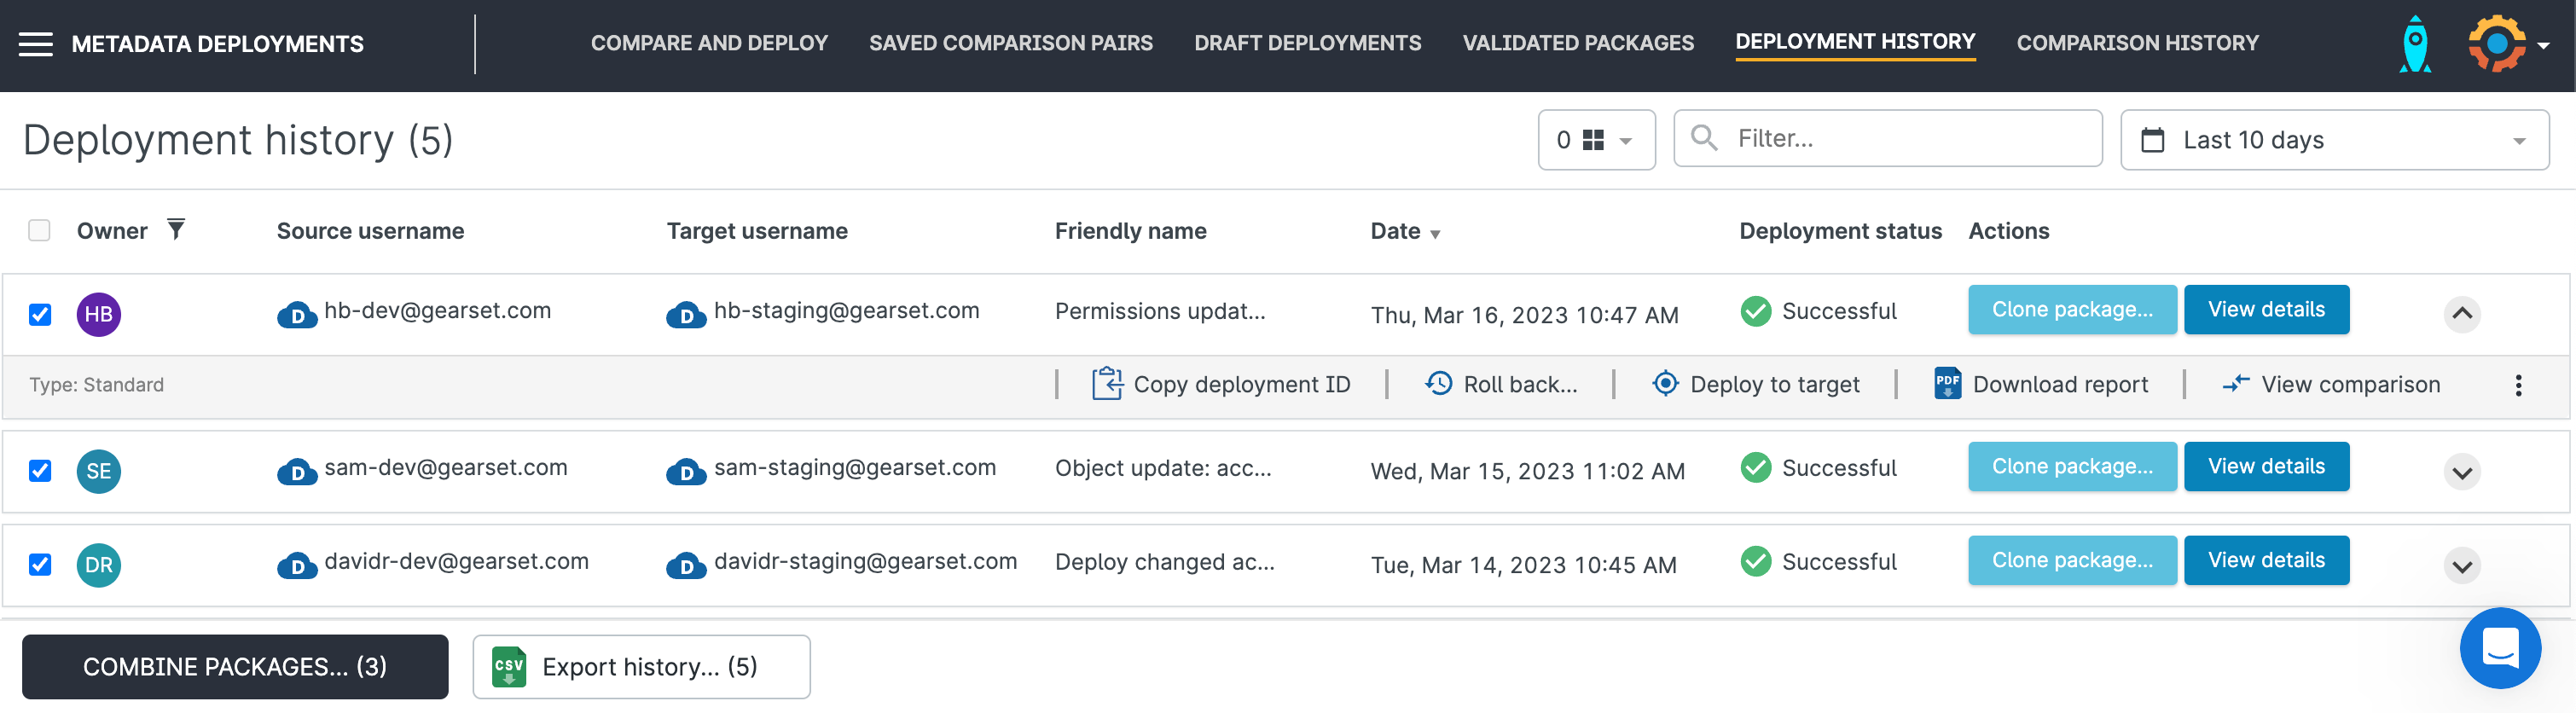 You can clone, combine or re-deploy packages from the deployment history page